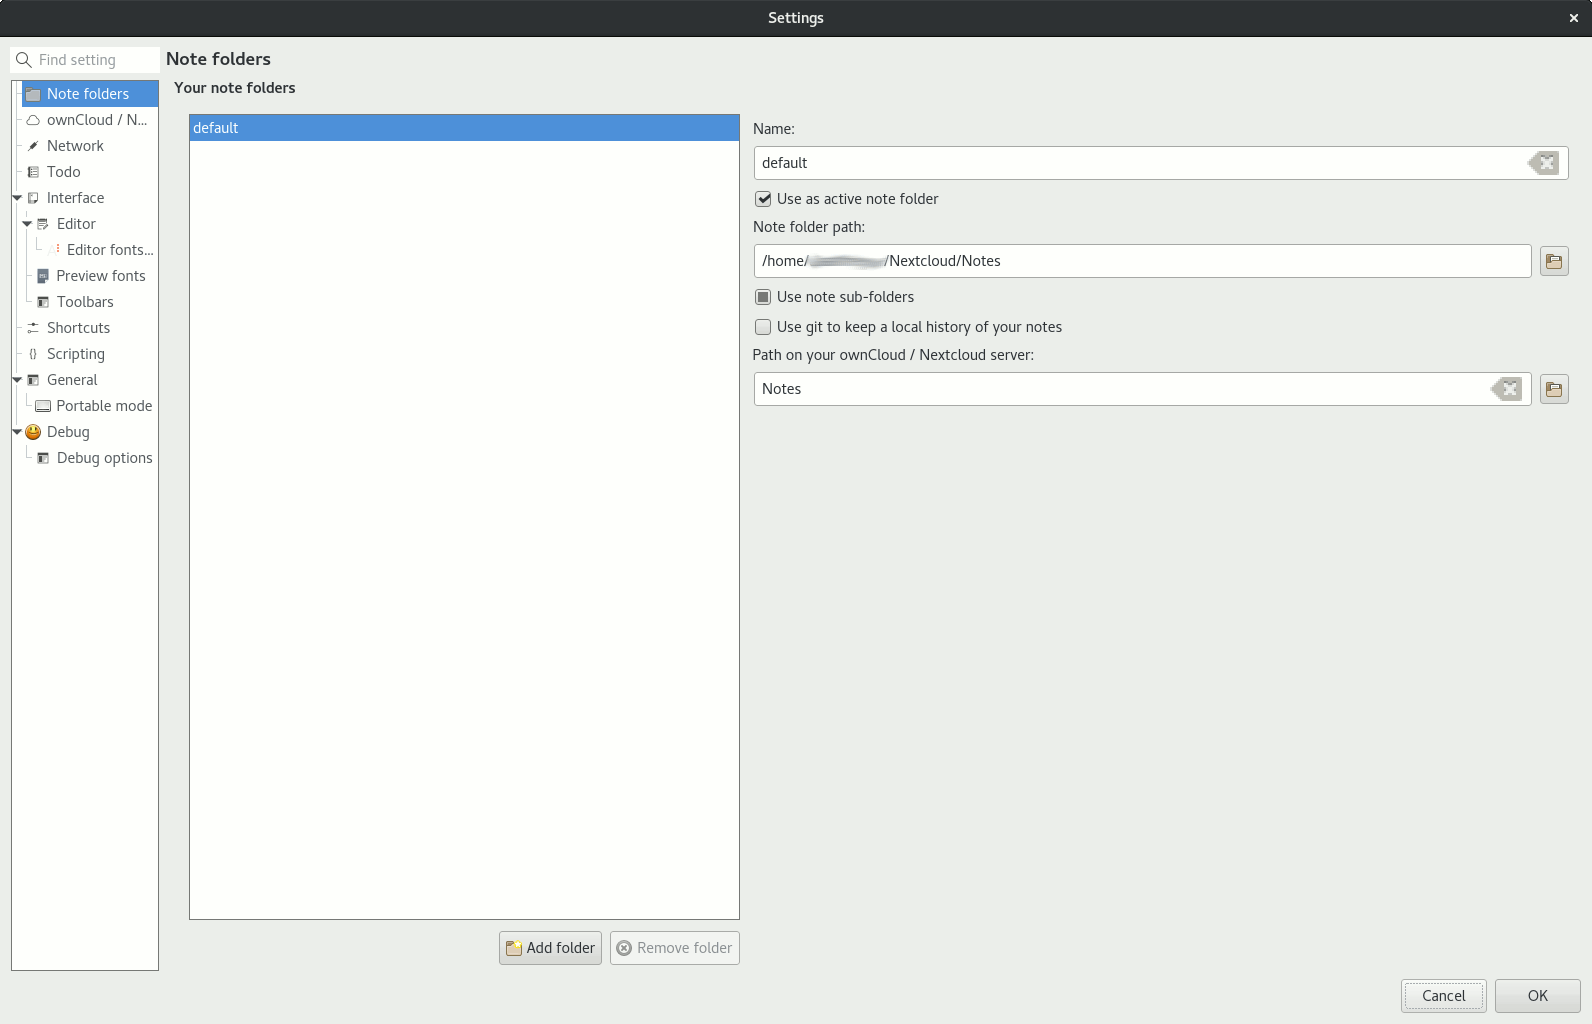 Screenshot of the ownCloud/Nextcloud section of QOwnNotes settings dialog